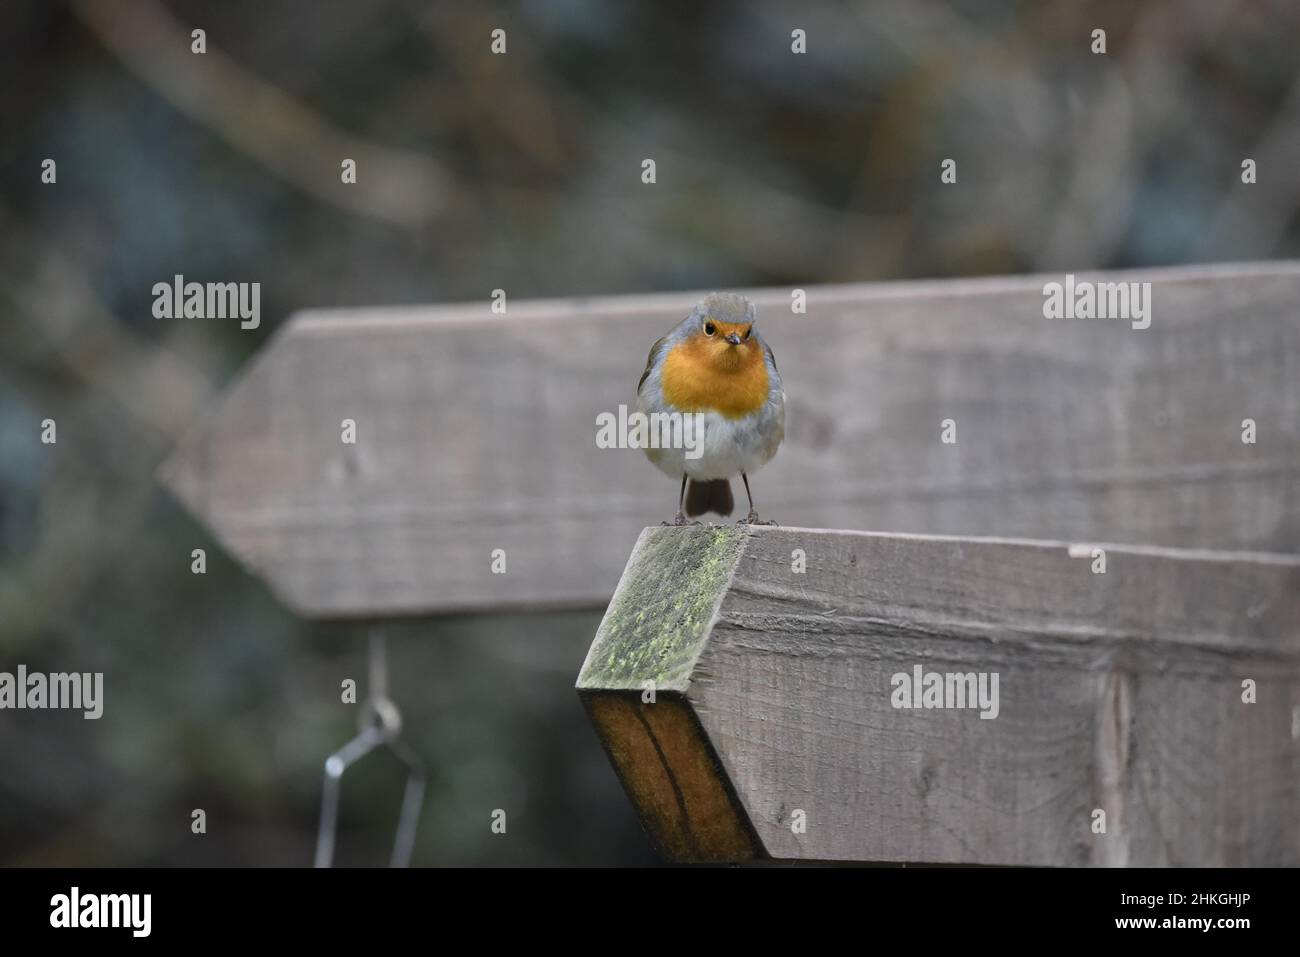 Image of a European Robin (Erithacus rubecula) Perched on a Forward Facing Wooden Arrow, Looking into Camera, with a Left Arrow in the Background, UK Stock Photo